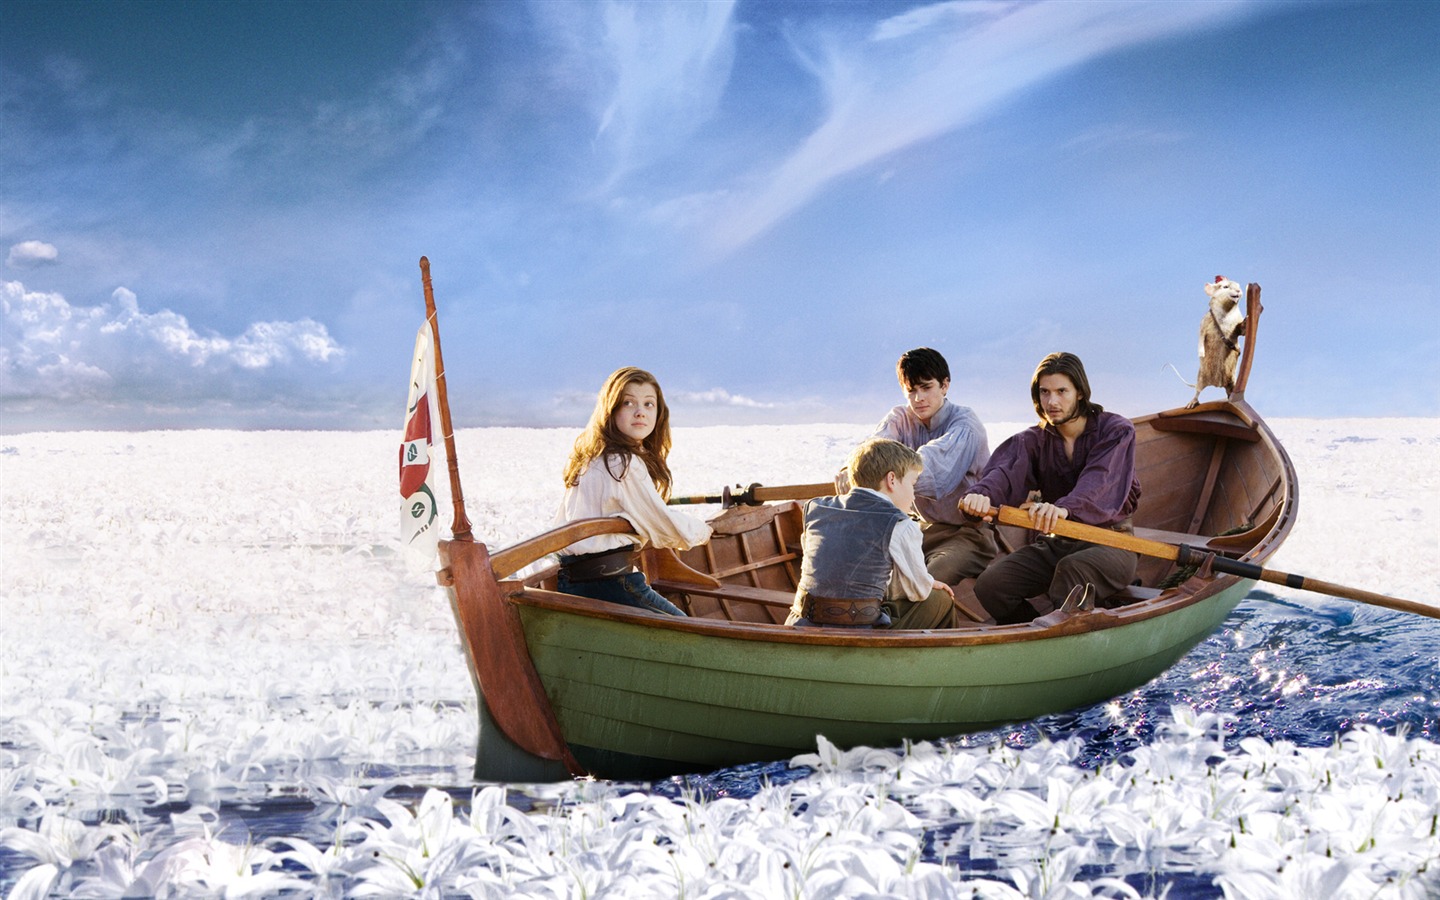 The Chronicles of Narnia: The Voyage of the Dawn Treader wallpapers #12 - 1440x900